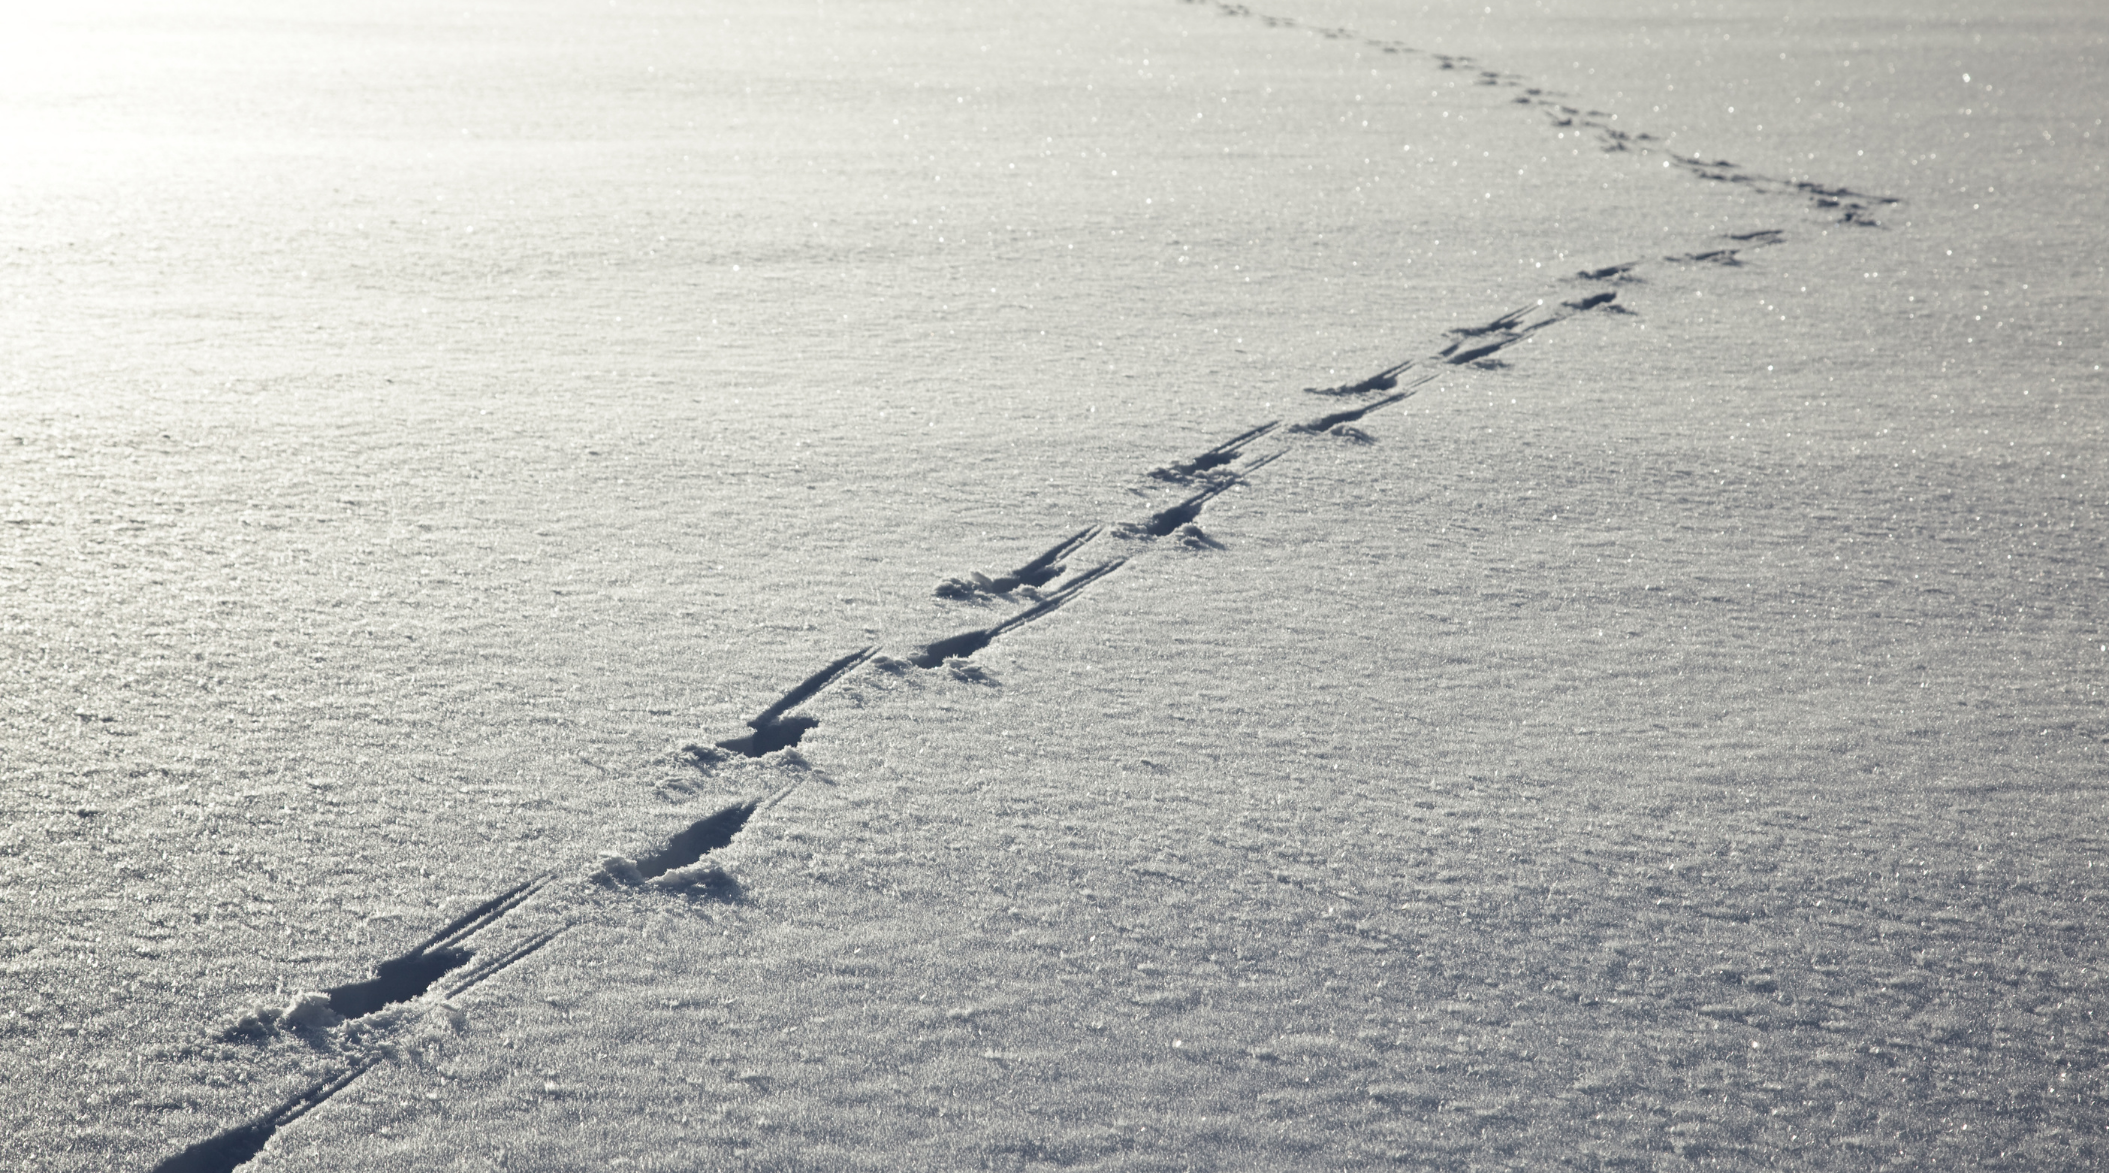 Footprints in the sand in ny state say the ending of hunting season 2013